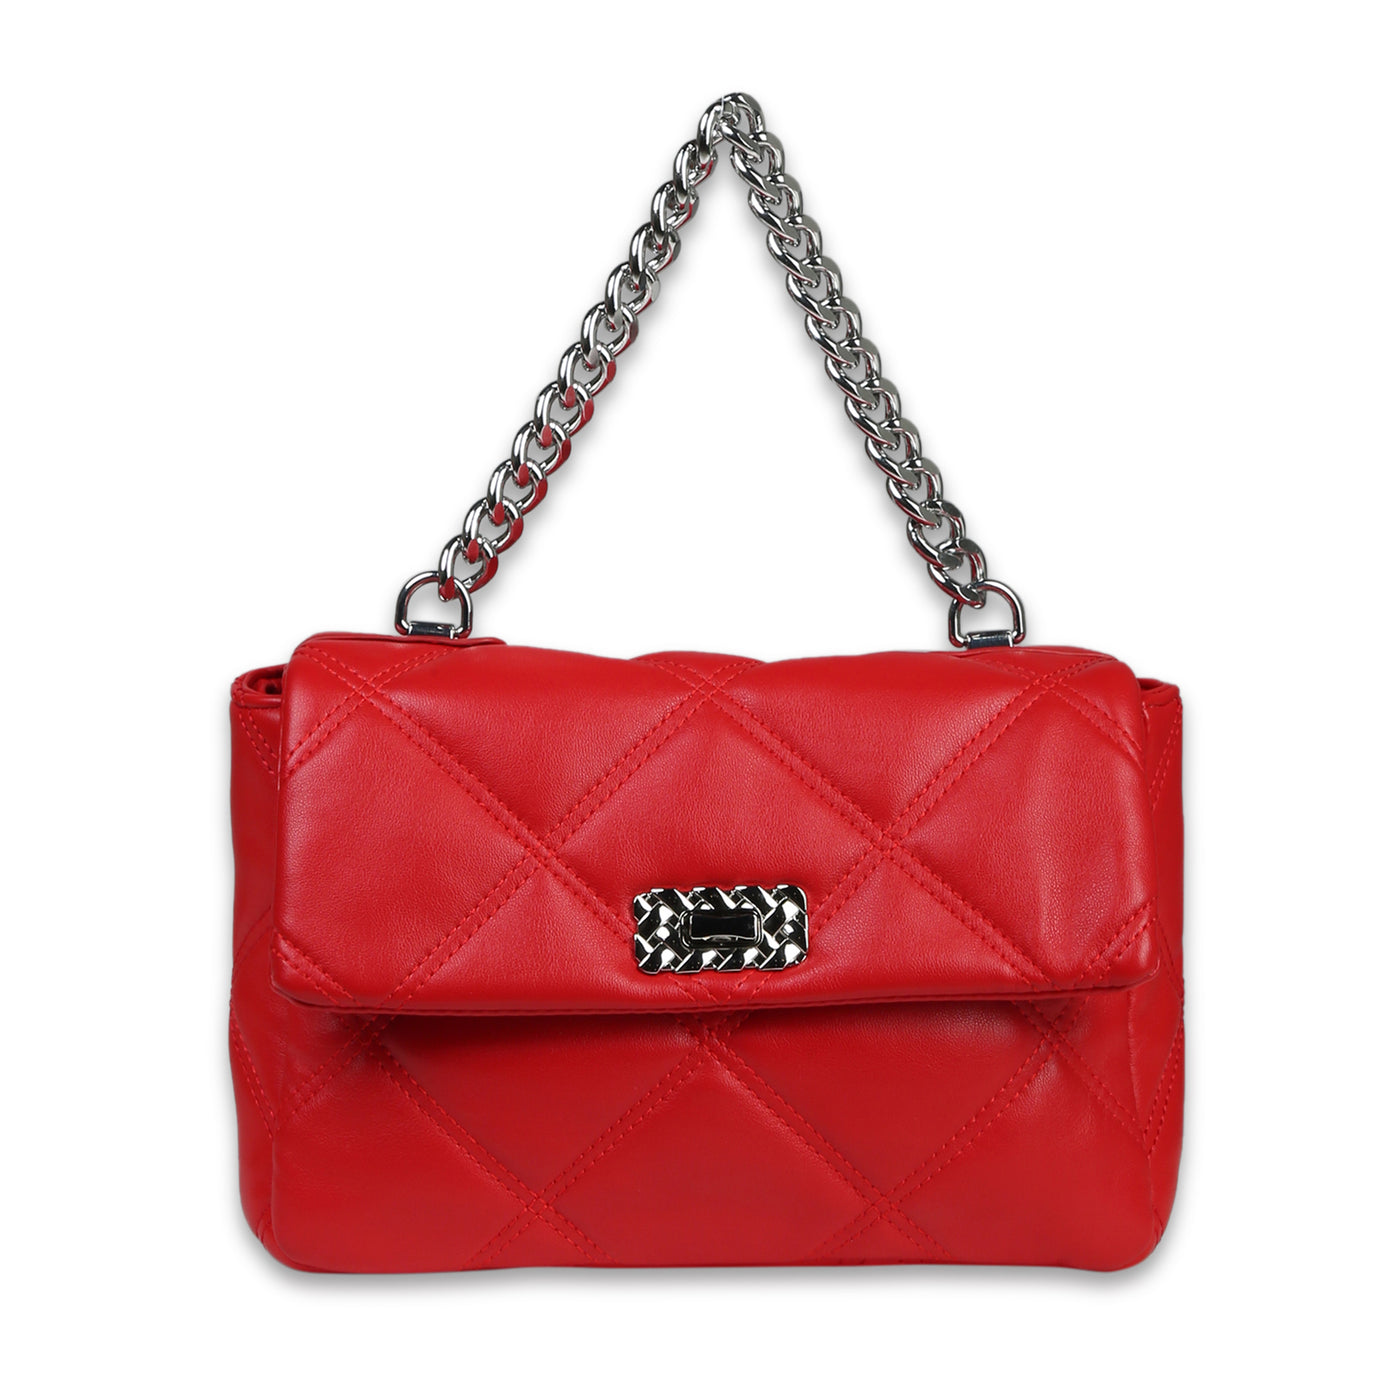 Quilted Handbag with Chain Strap